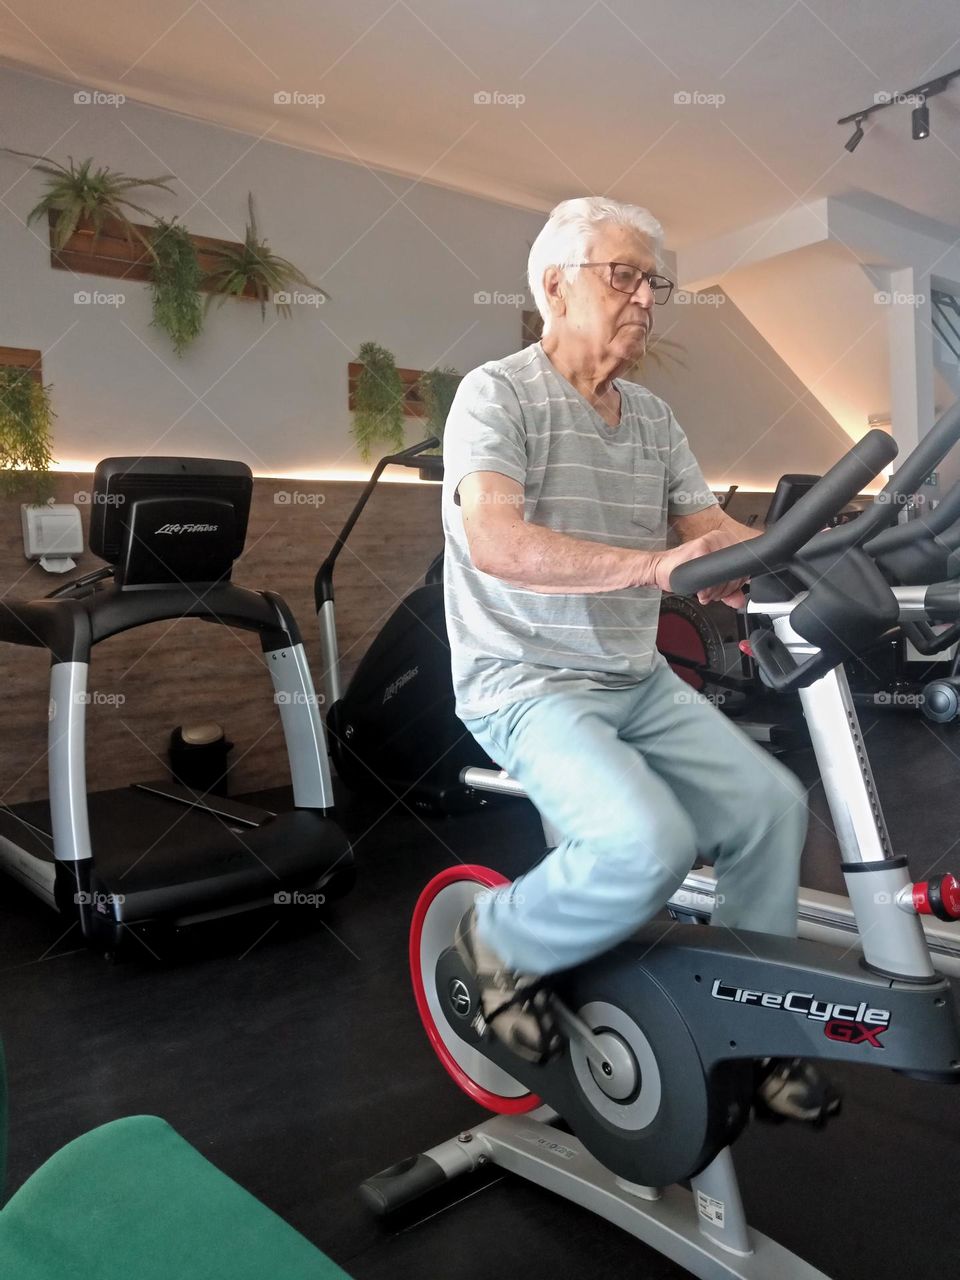 Elderly man on a bicycle in the gym